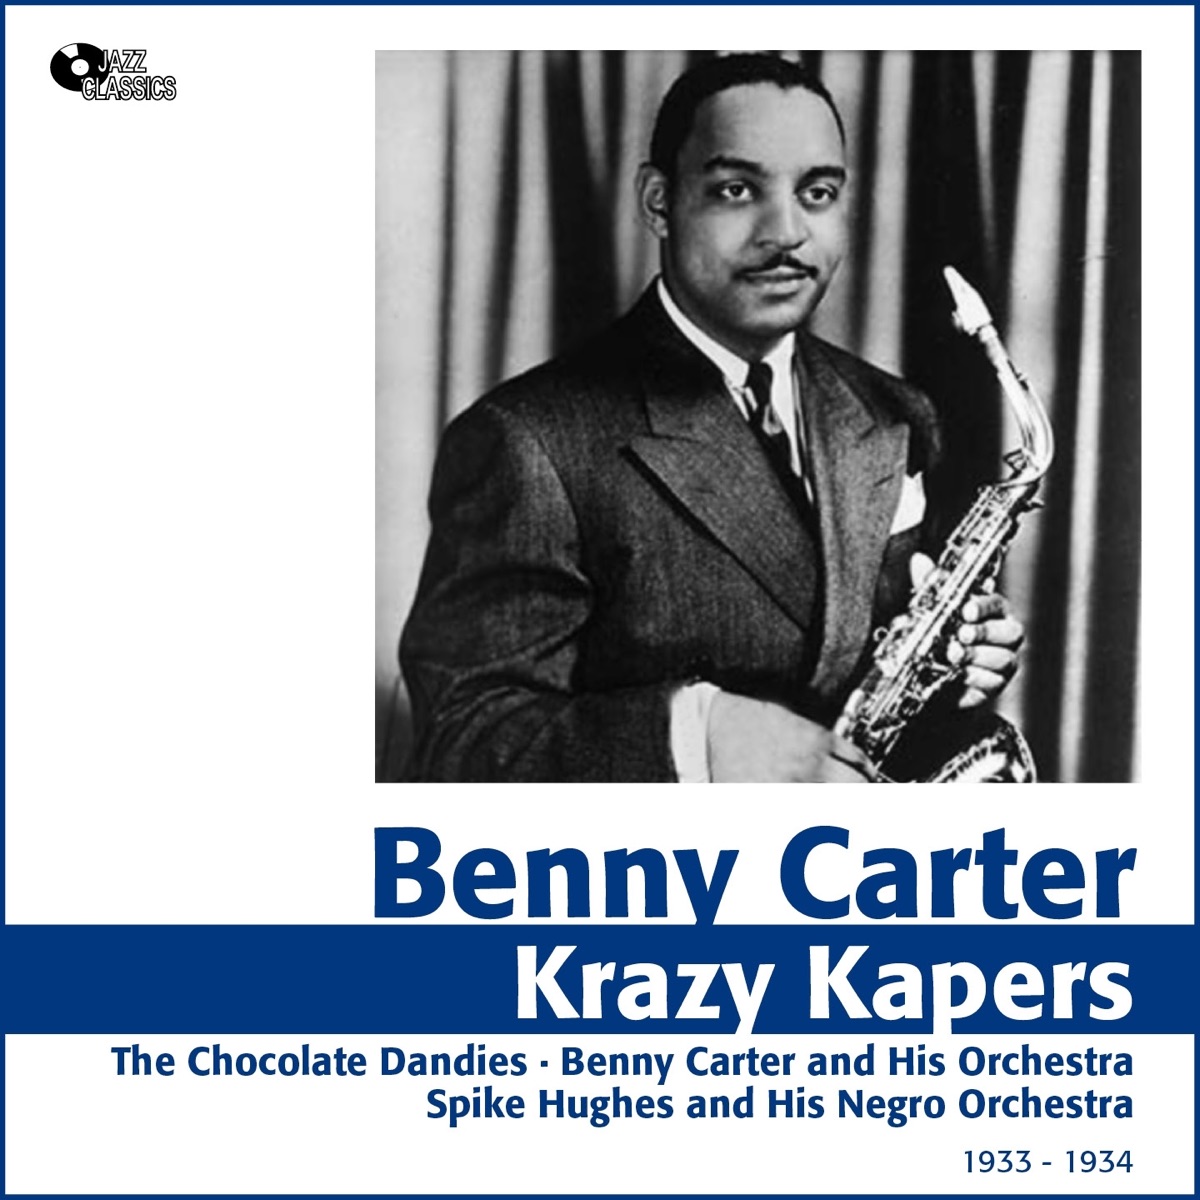 Vol. 3 (1933-1934) by Benny Carter on Apple Music